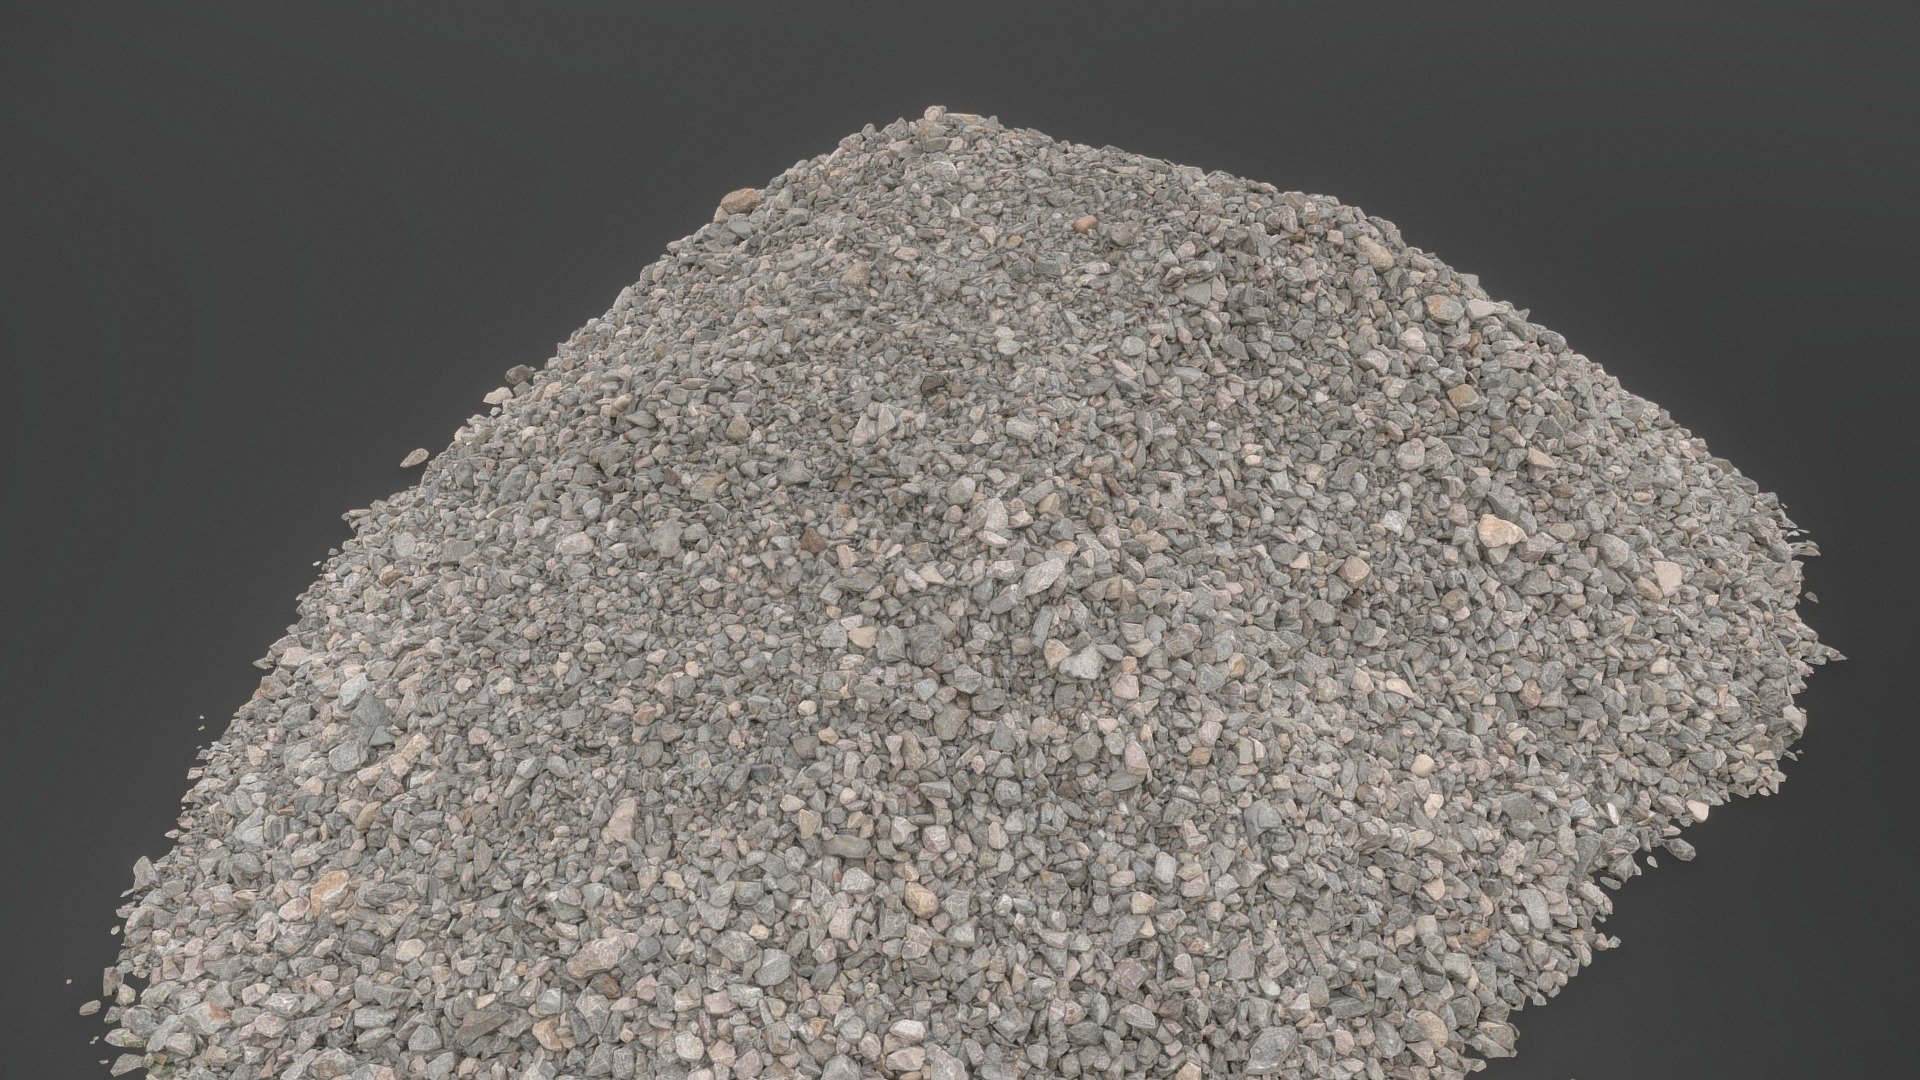 Large high Gray Paving gravel heap pile mound of building pavement construction material small stones pebble of quartz

Photogrammetry scan 140x36MP, 4x8K texture + hd normals - Large gray paving gravel pile - Buy Royalty Free 3D model by matousekfoto 3d model